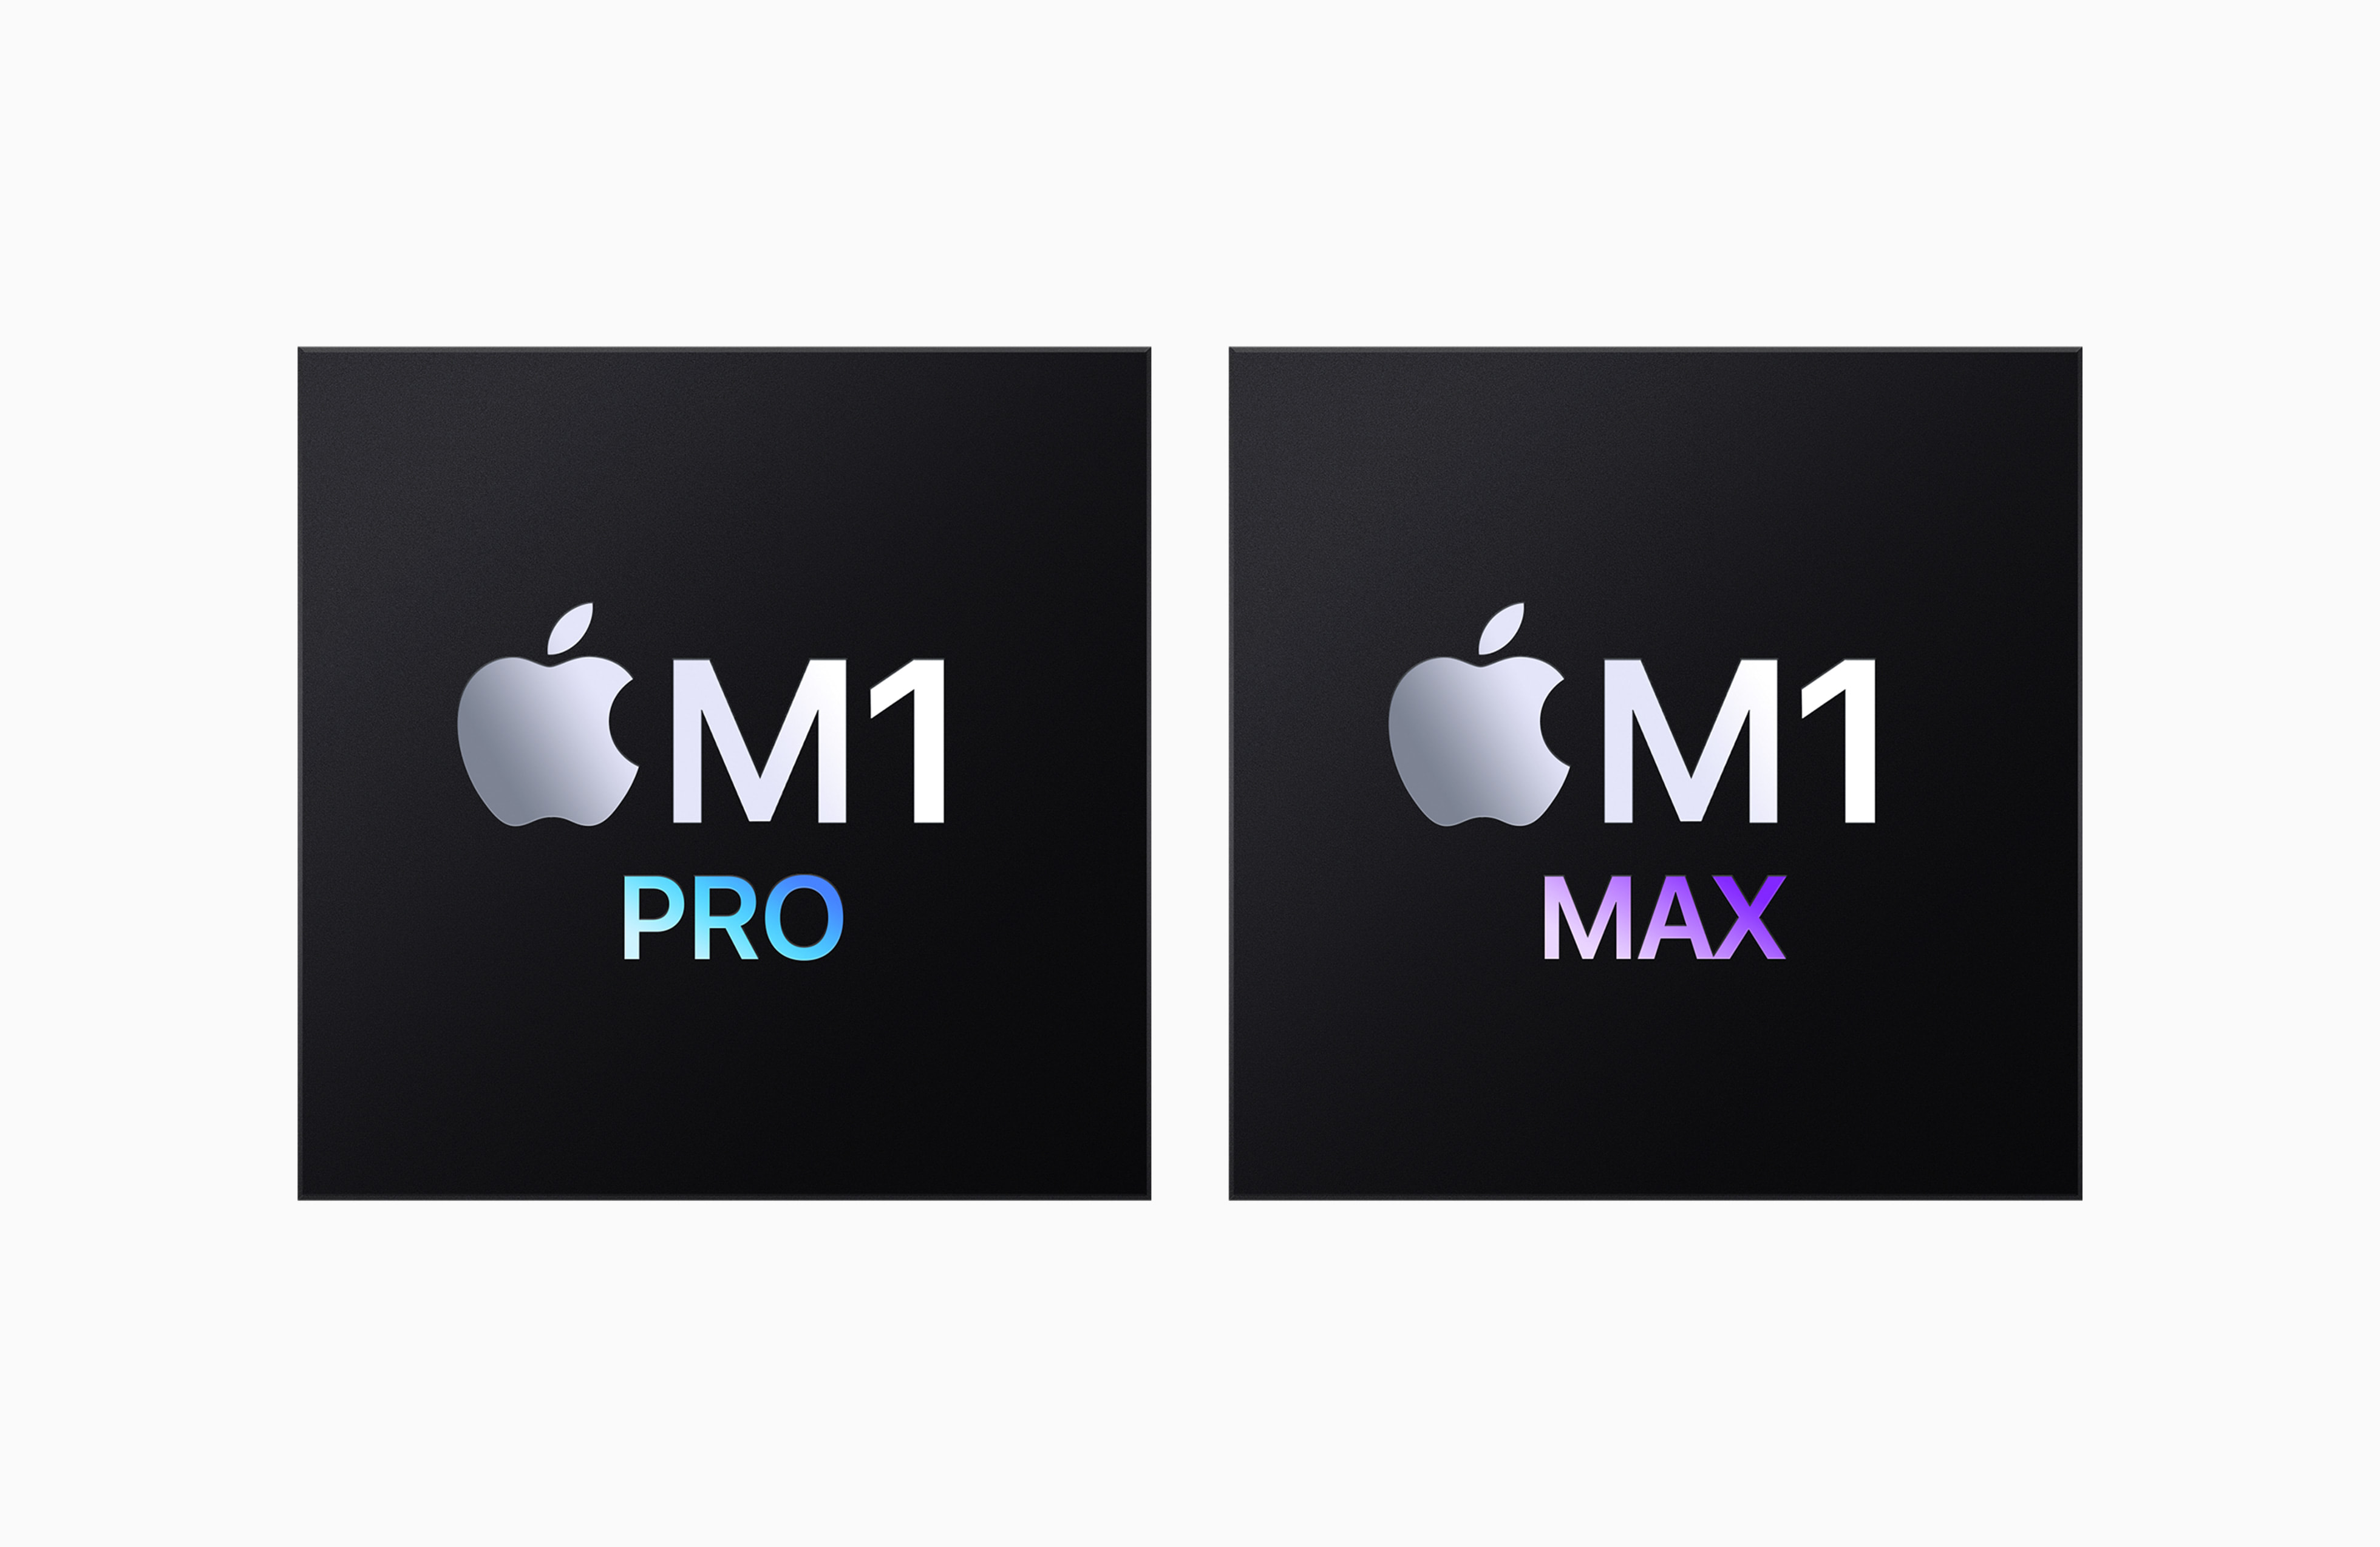 Introducing M1 Pro and M1 Max: the most powerful chips Apple has